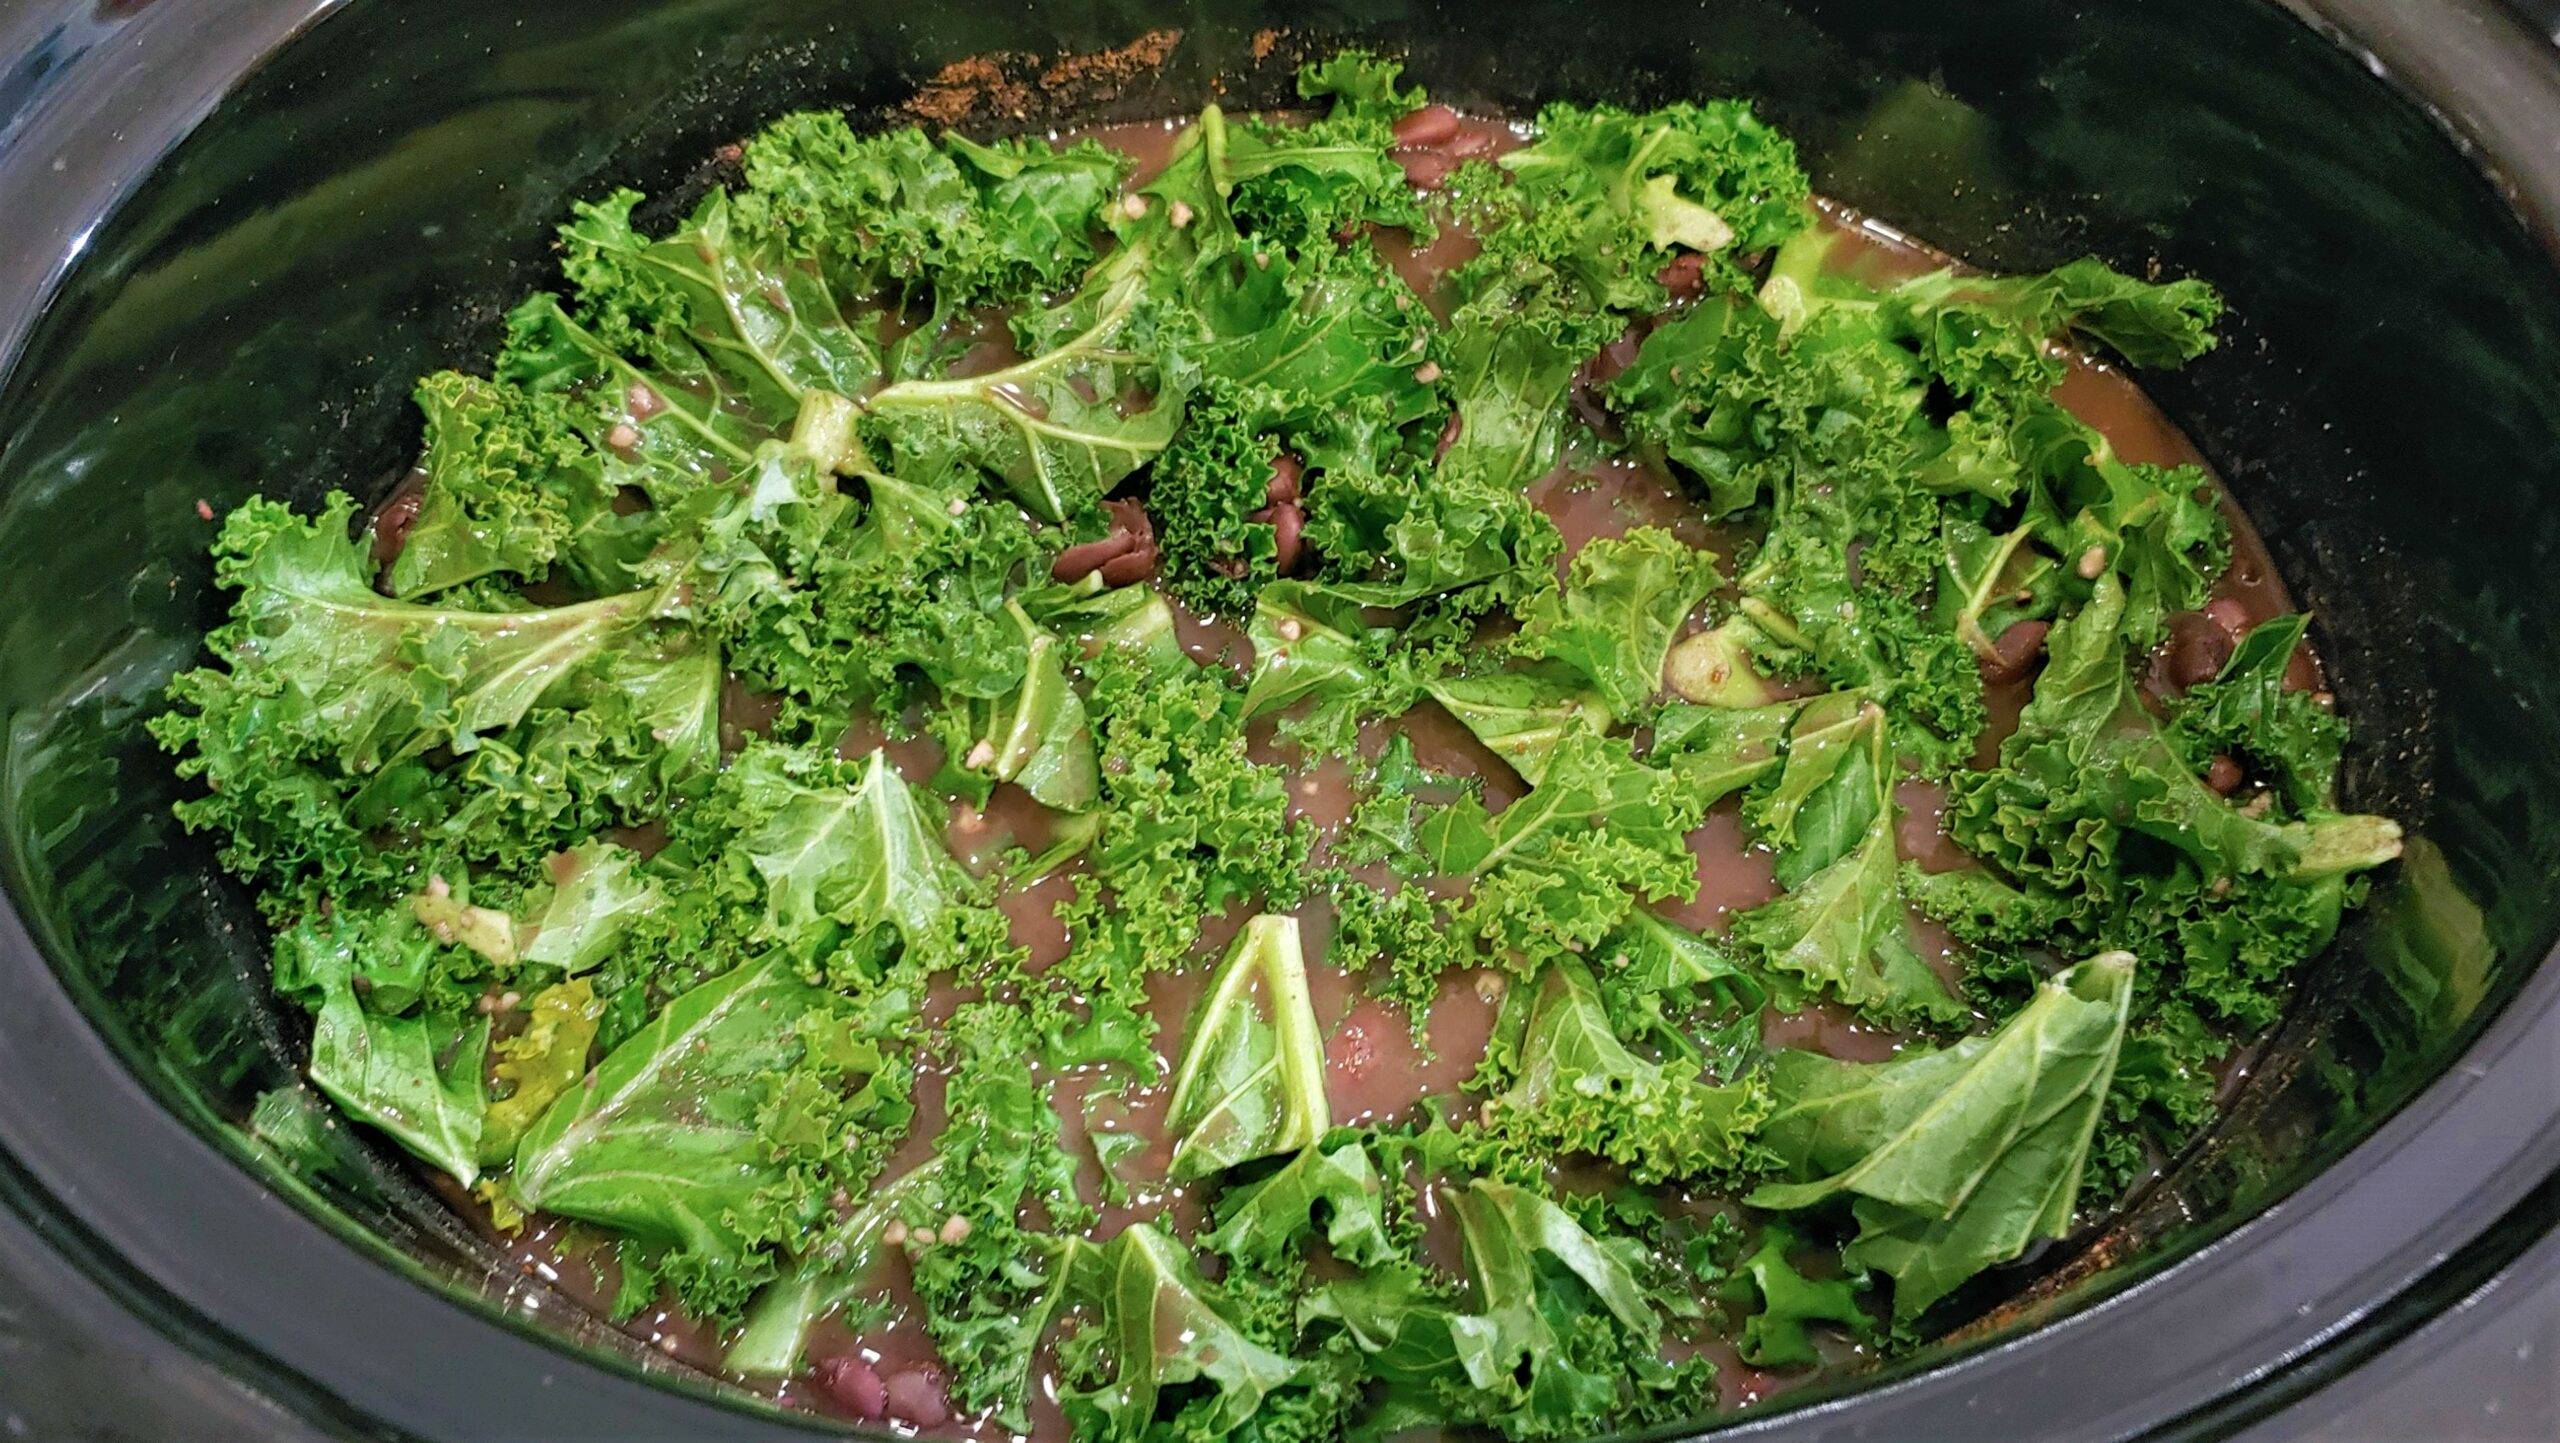 Slow cooker black beans and kale - Dining in with Danielle